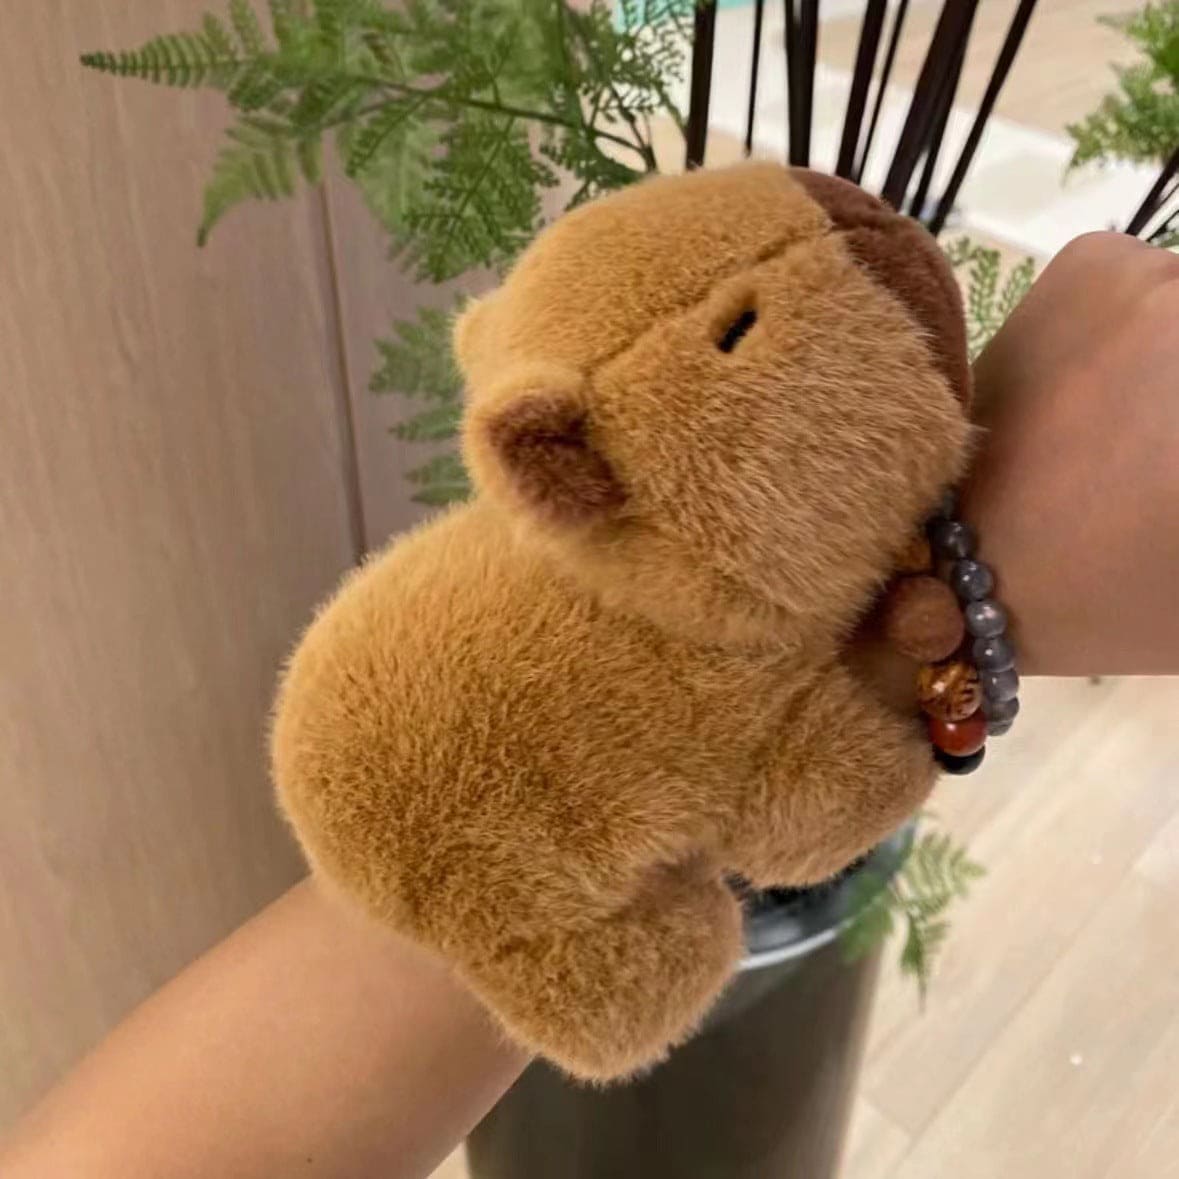 Capabala Capybara Ring Can Be Used For Curtain Buckle Emotional Stability